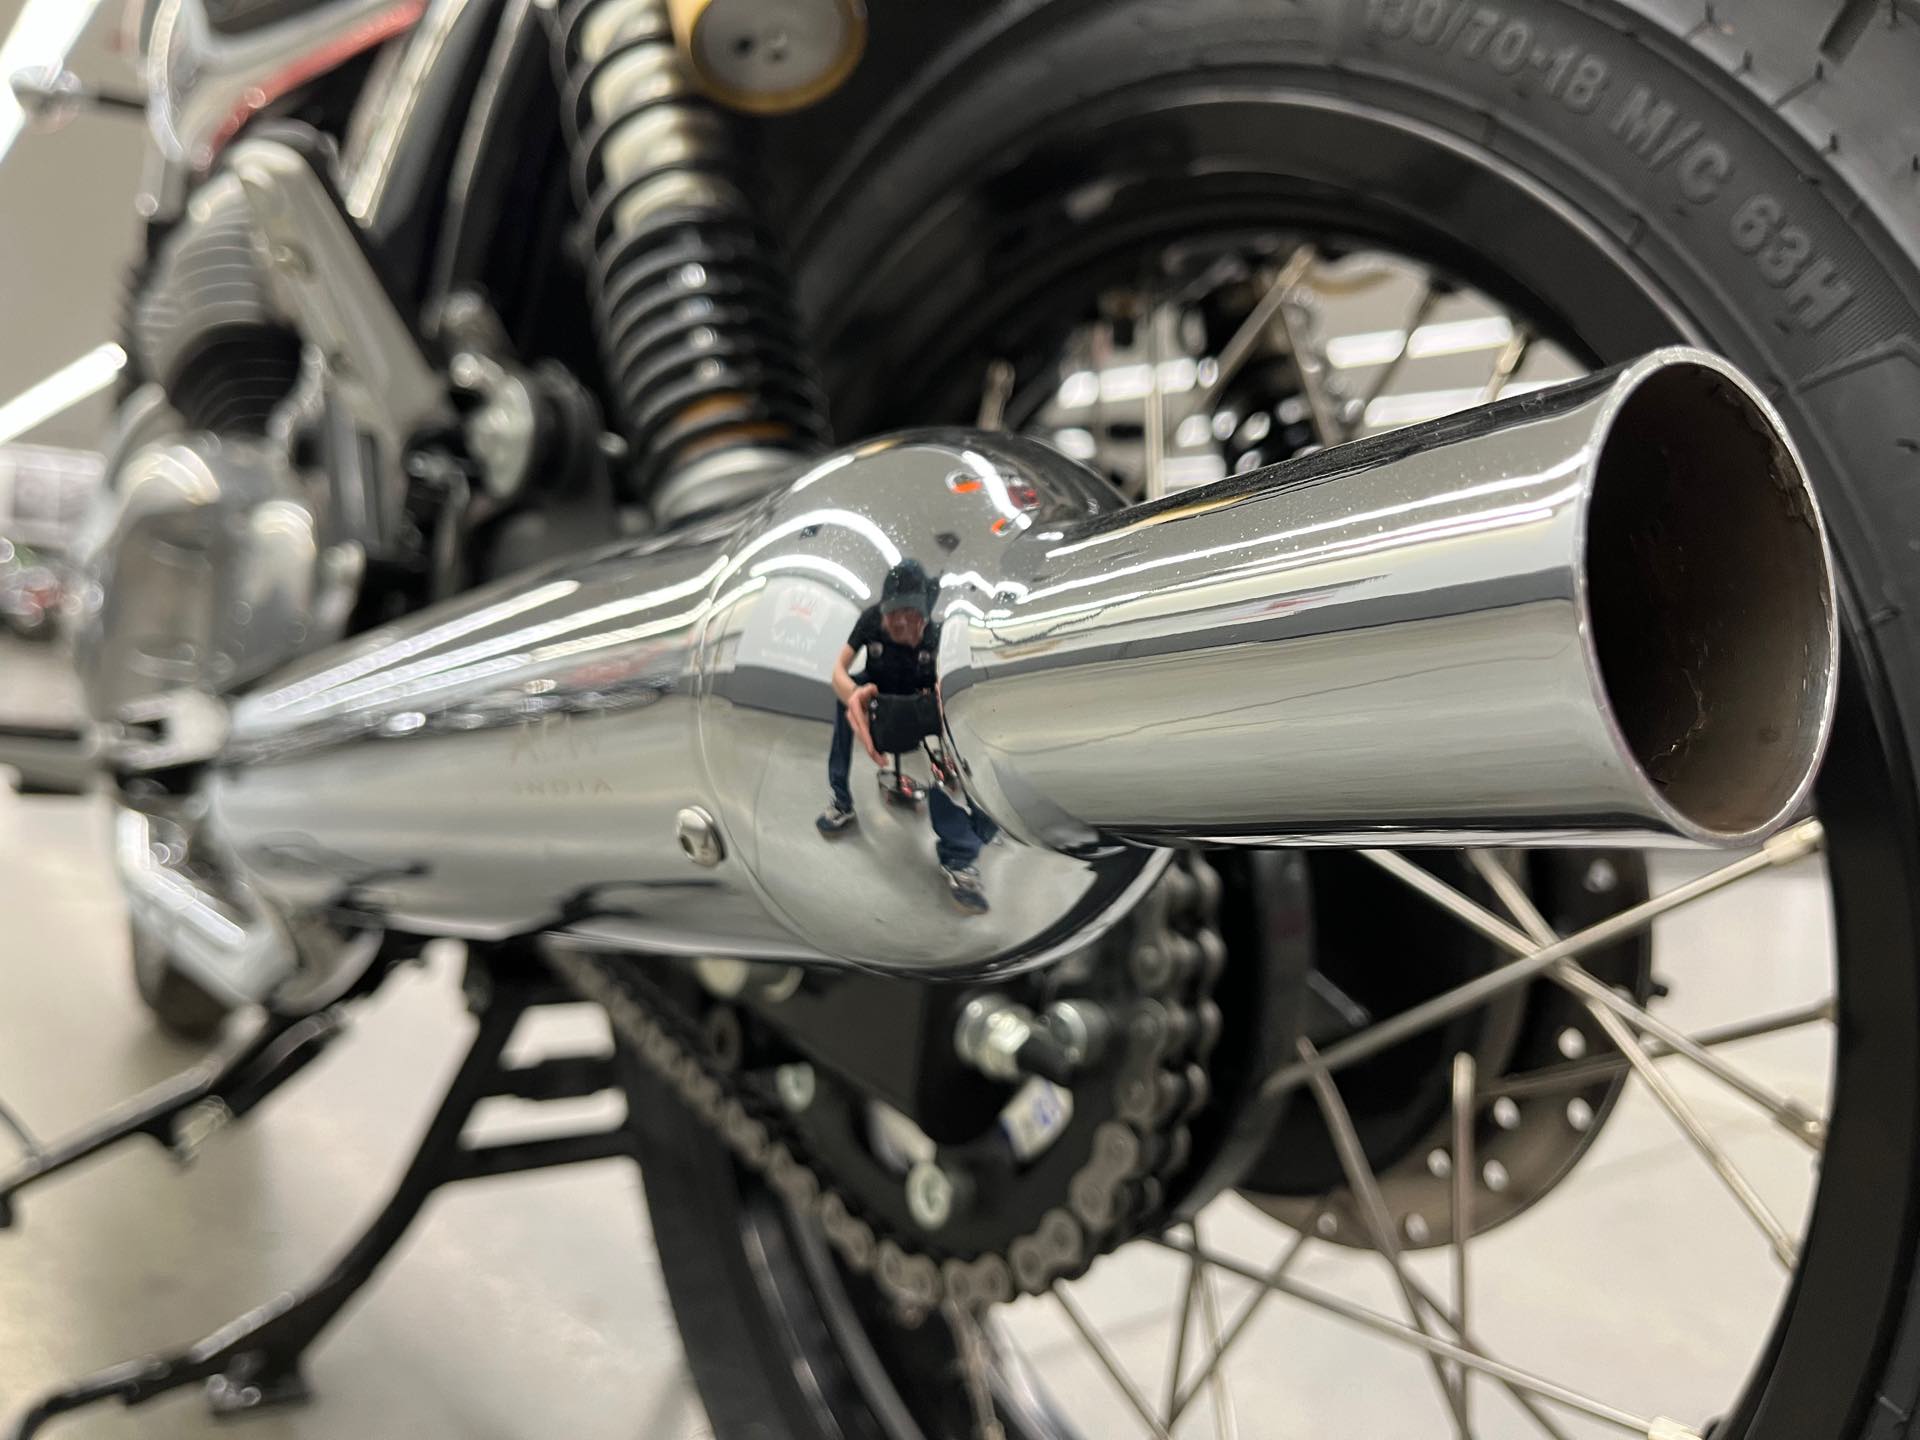 2023 Royal Enfield Twins INT650 at Aces Motorcycles - Denver